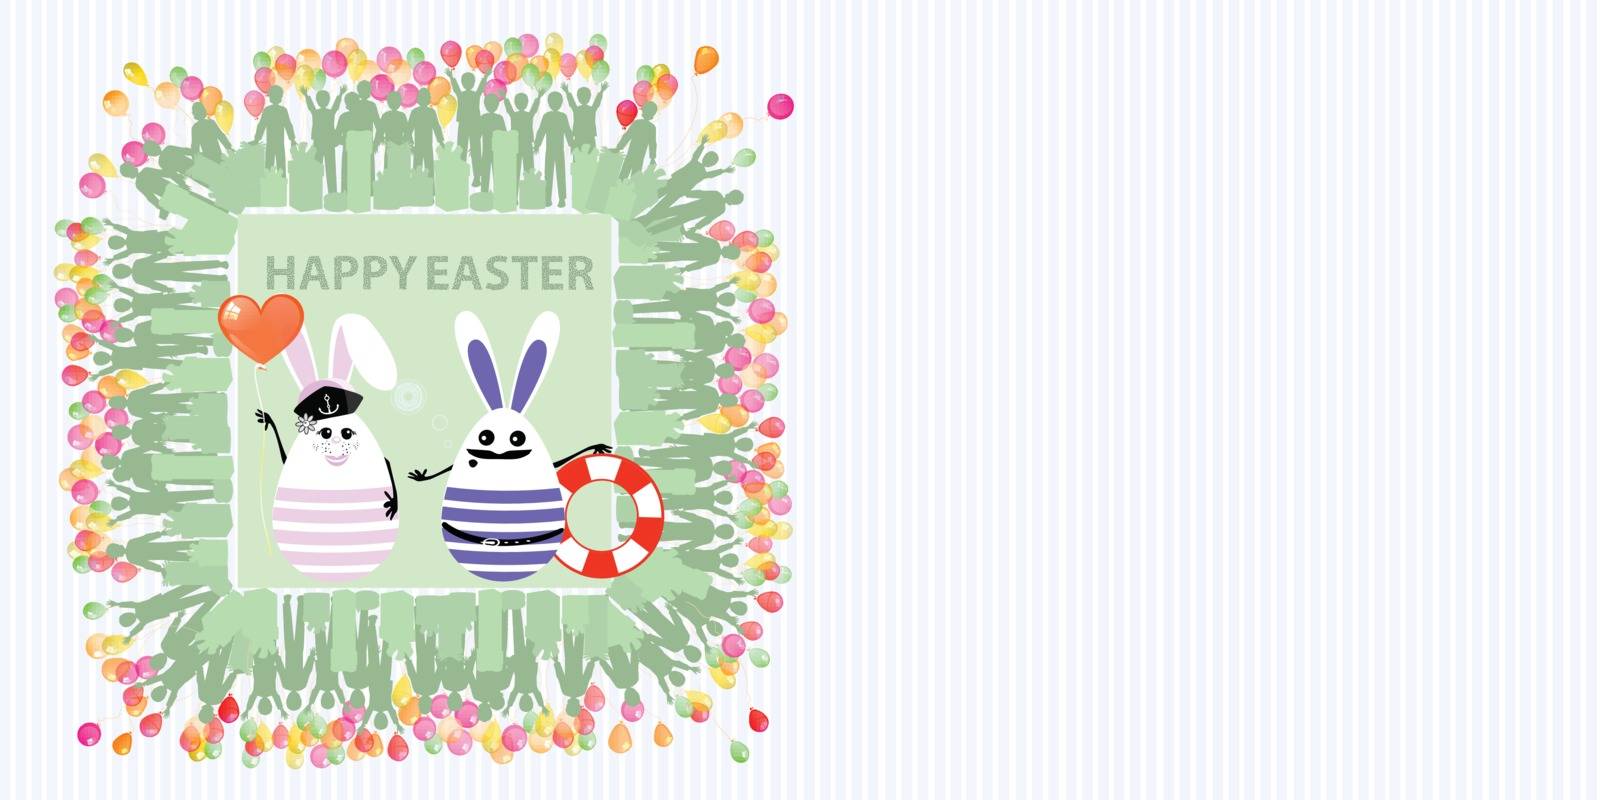 Easter illustration with place for text. Rabbits sailors with an air ball in the shape of a heart and a life buoy, a girl and a man, against a striped horizontally oriented leaf and a square frame